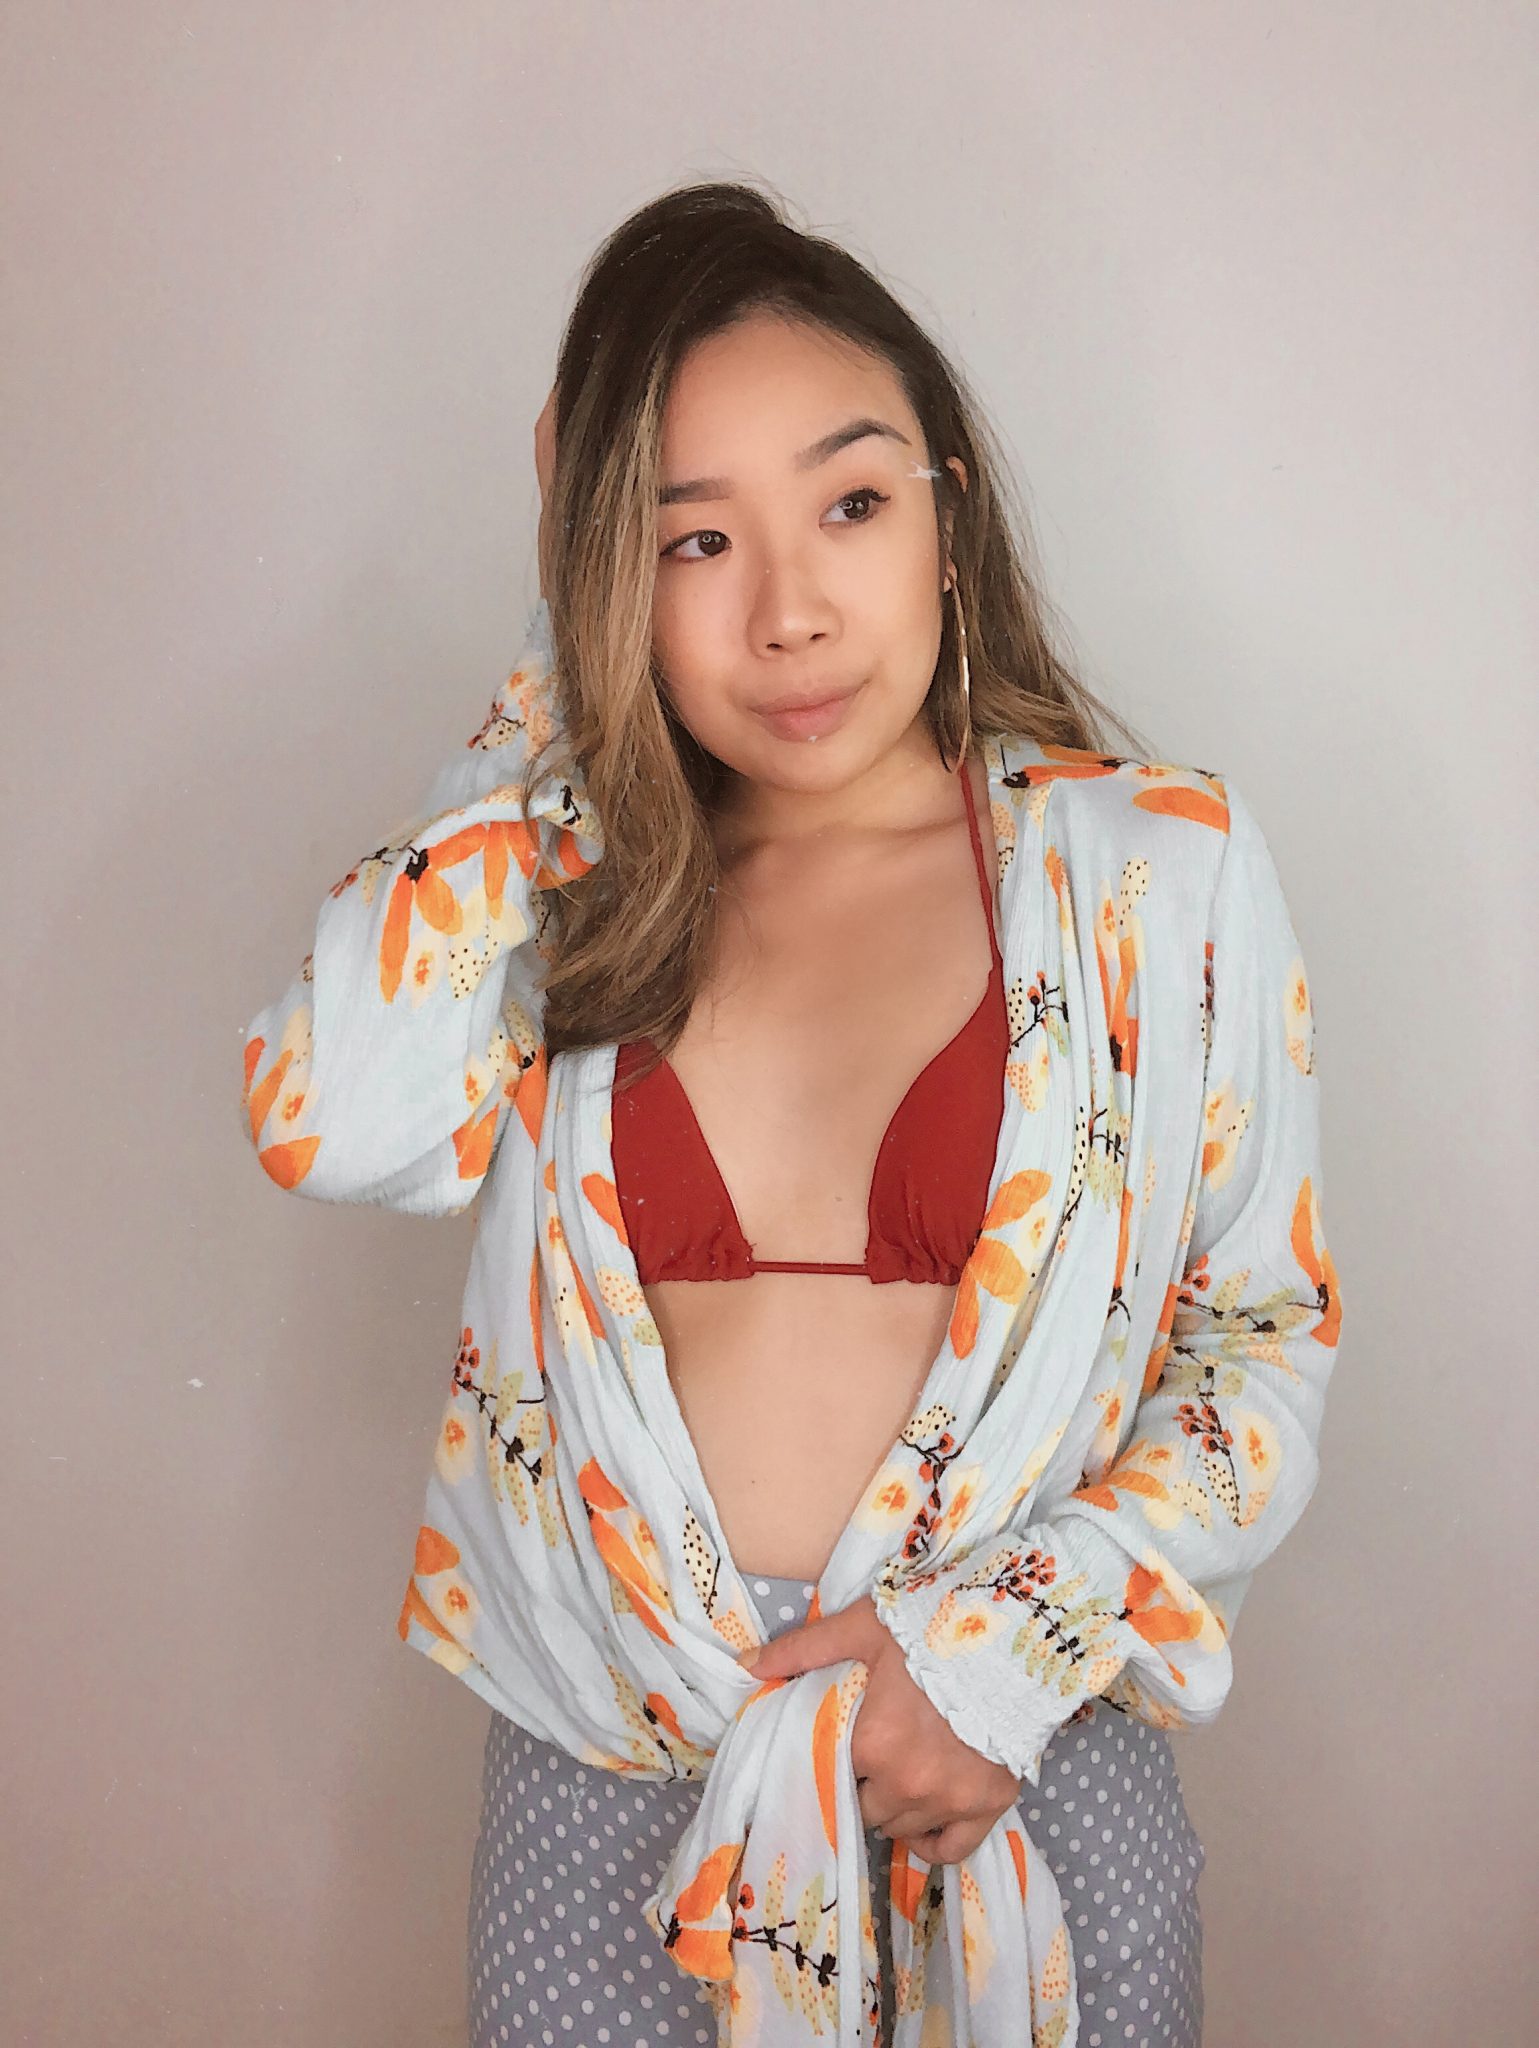 Pairing my red bikini top from express swimwear with a patterned button down shirt